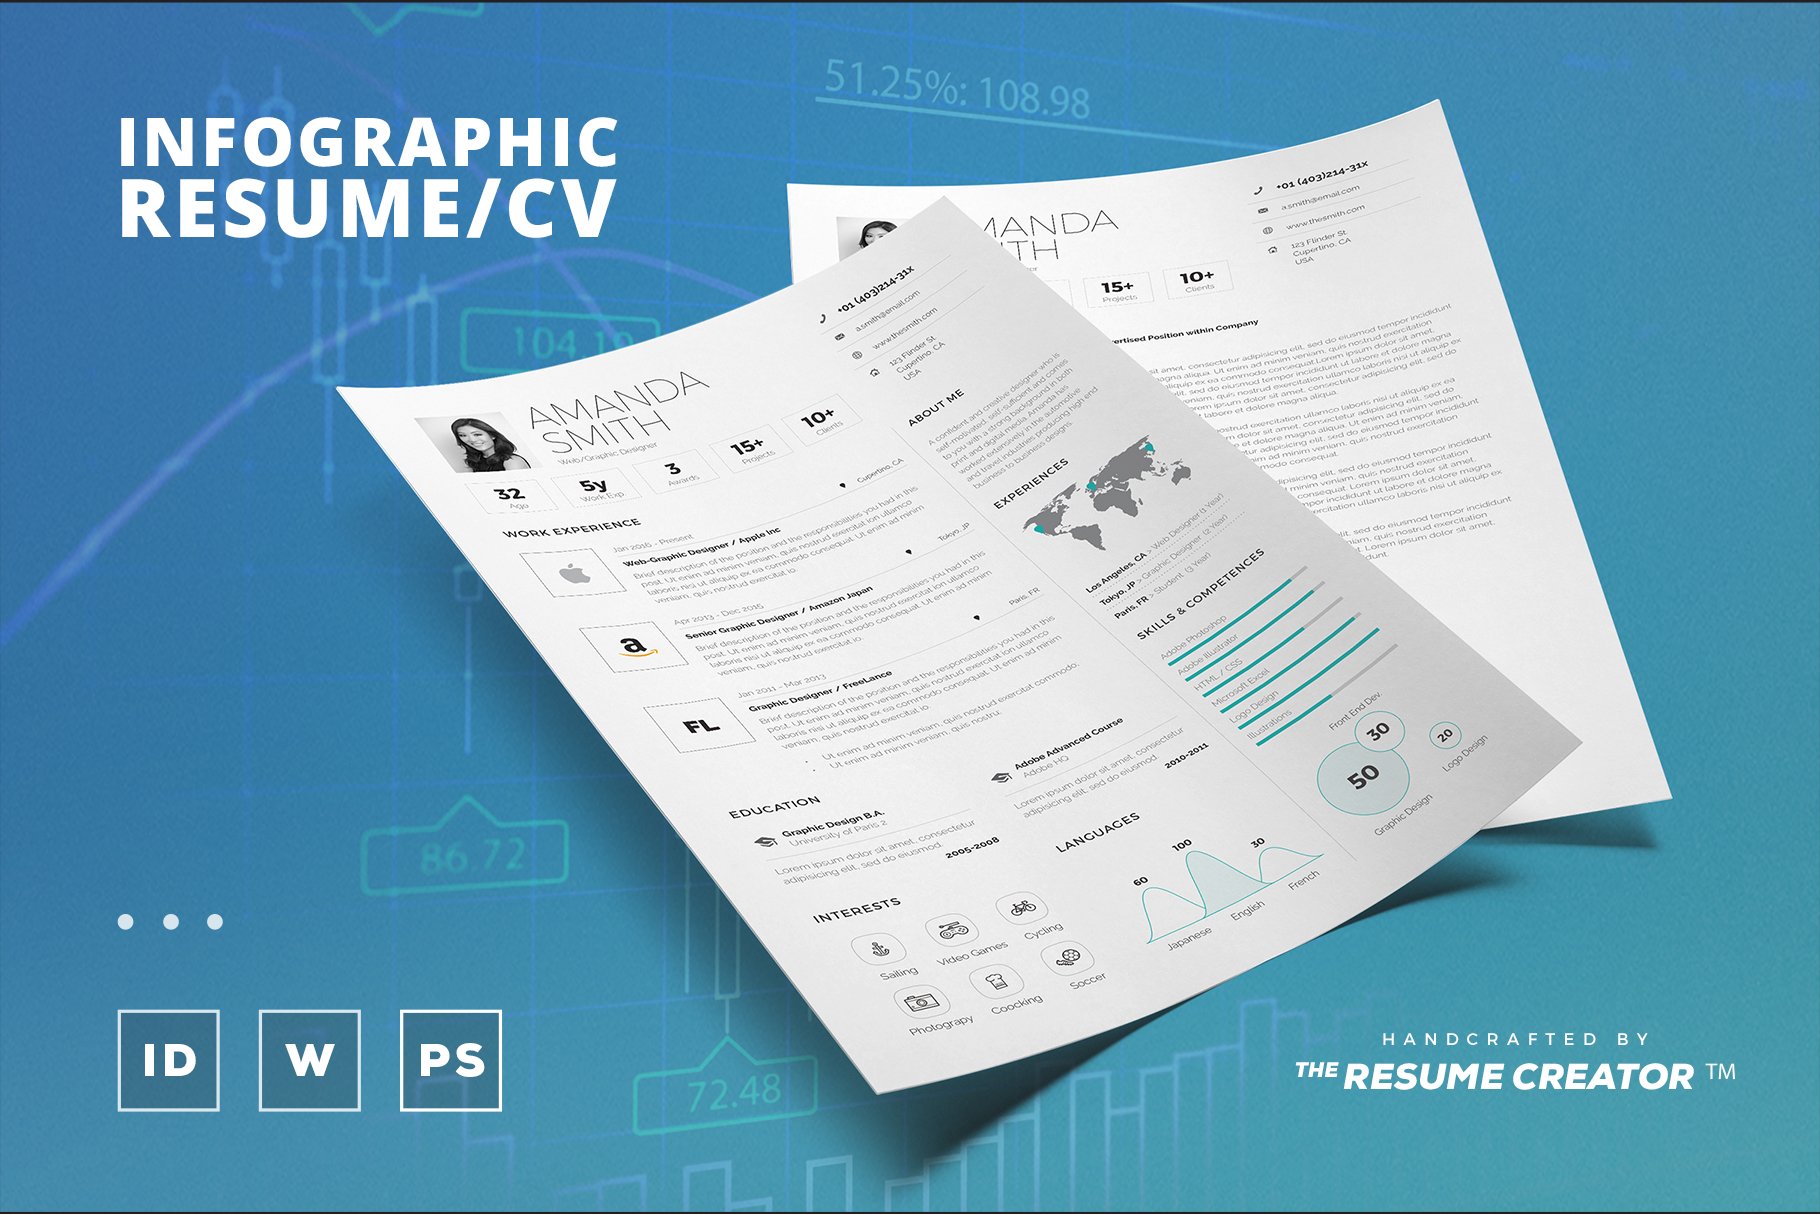 Infographic Resume/Cv Template Vol.6 cover image.